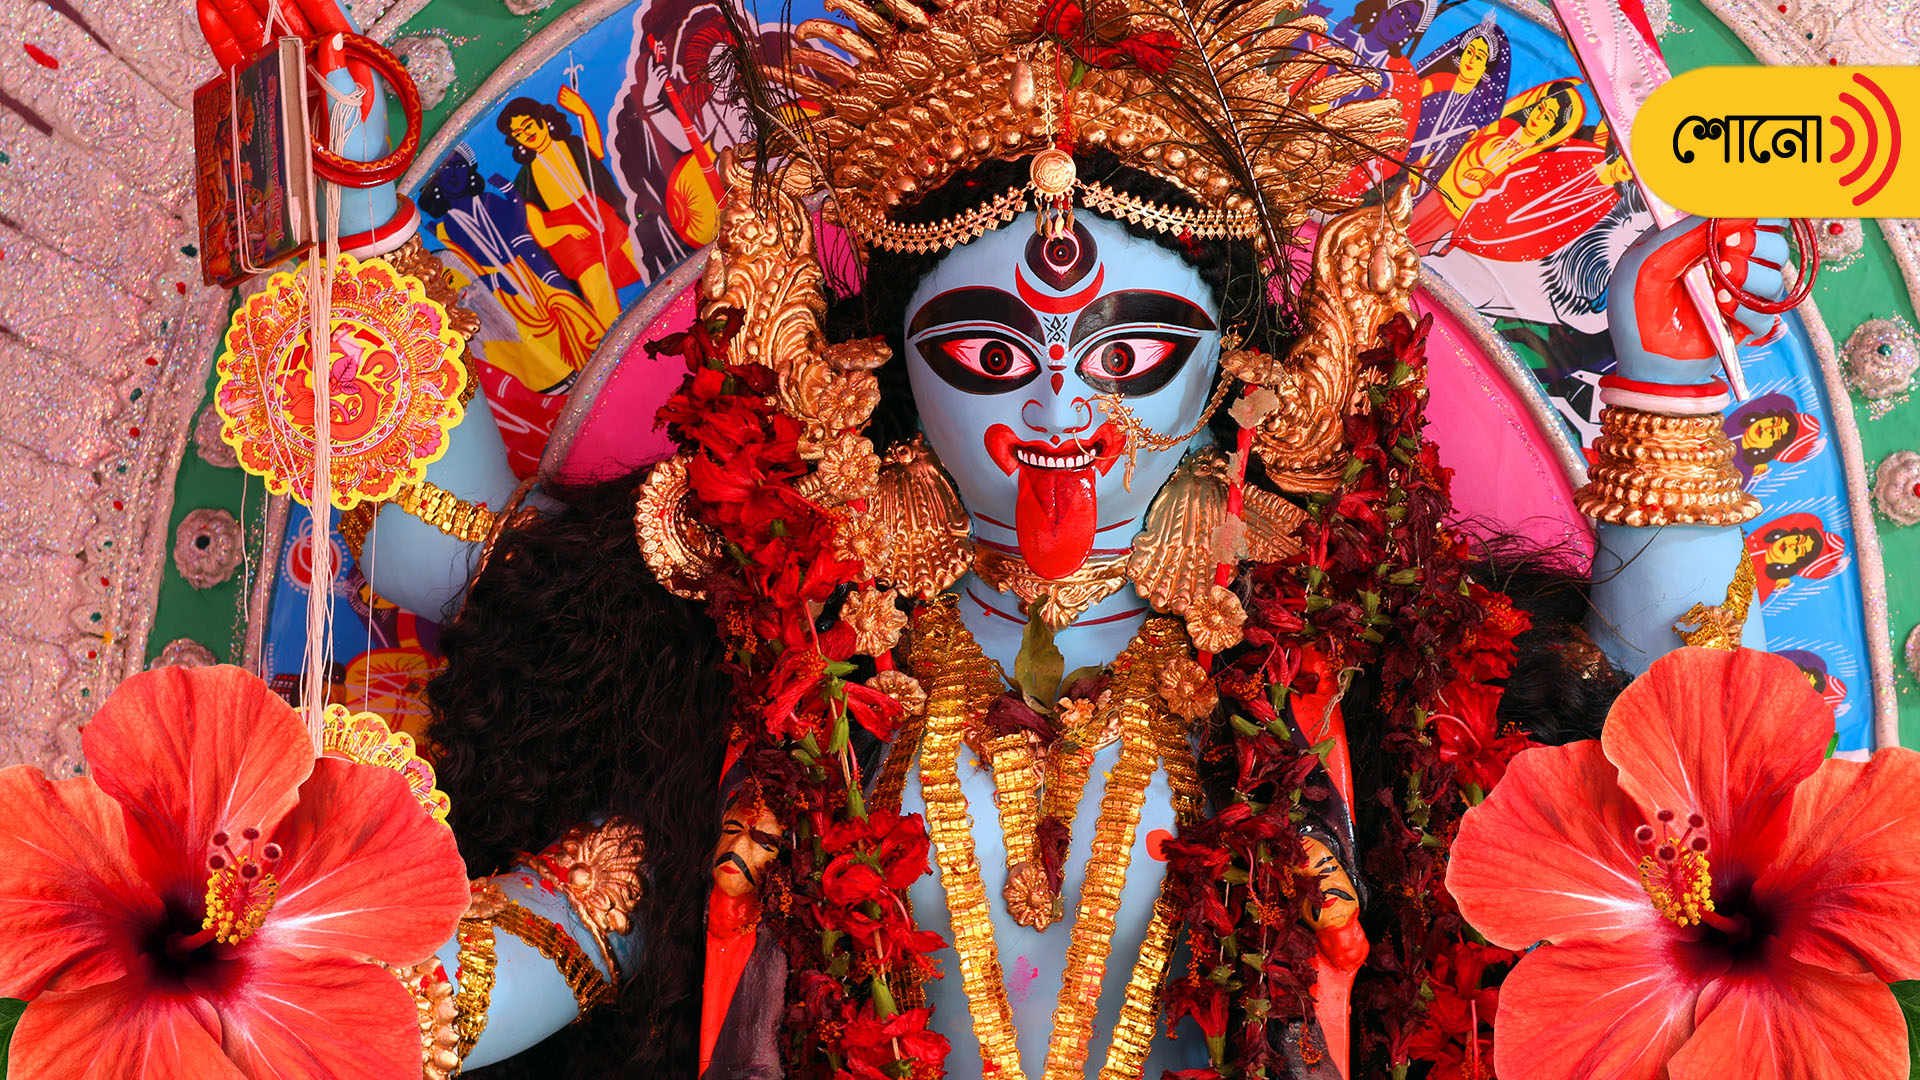 know more about the reason, why Hibiscus is essential for kali worship